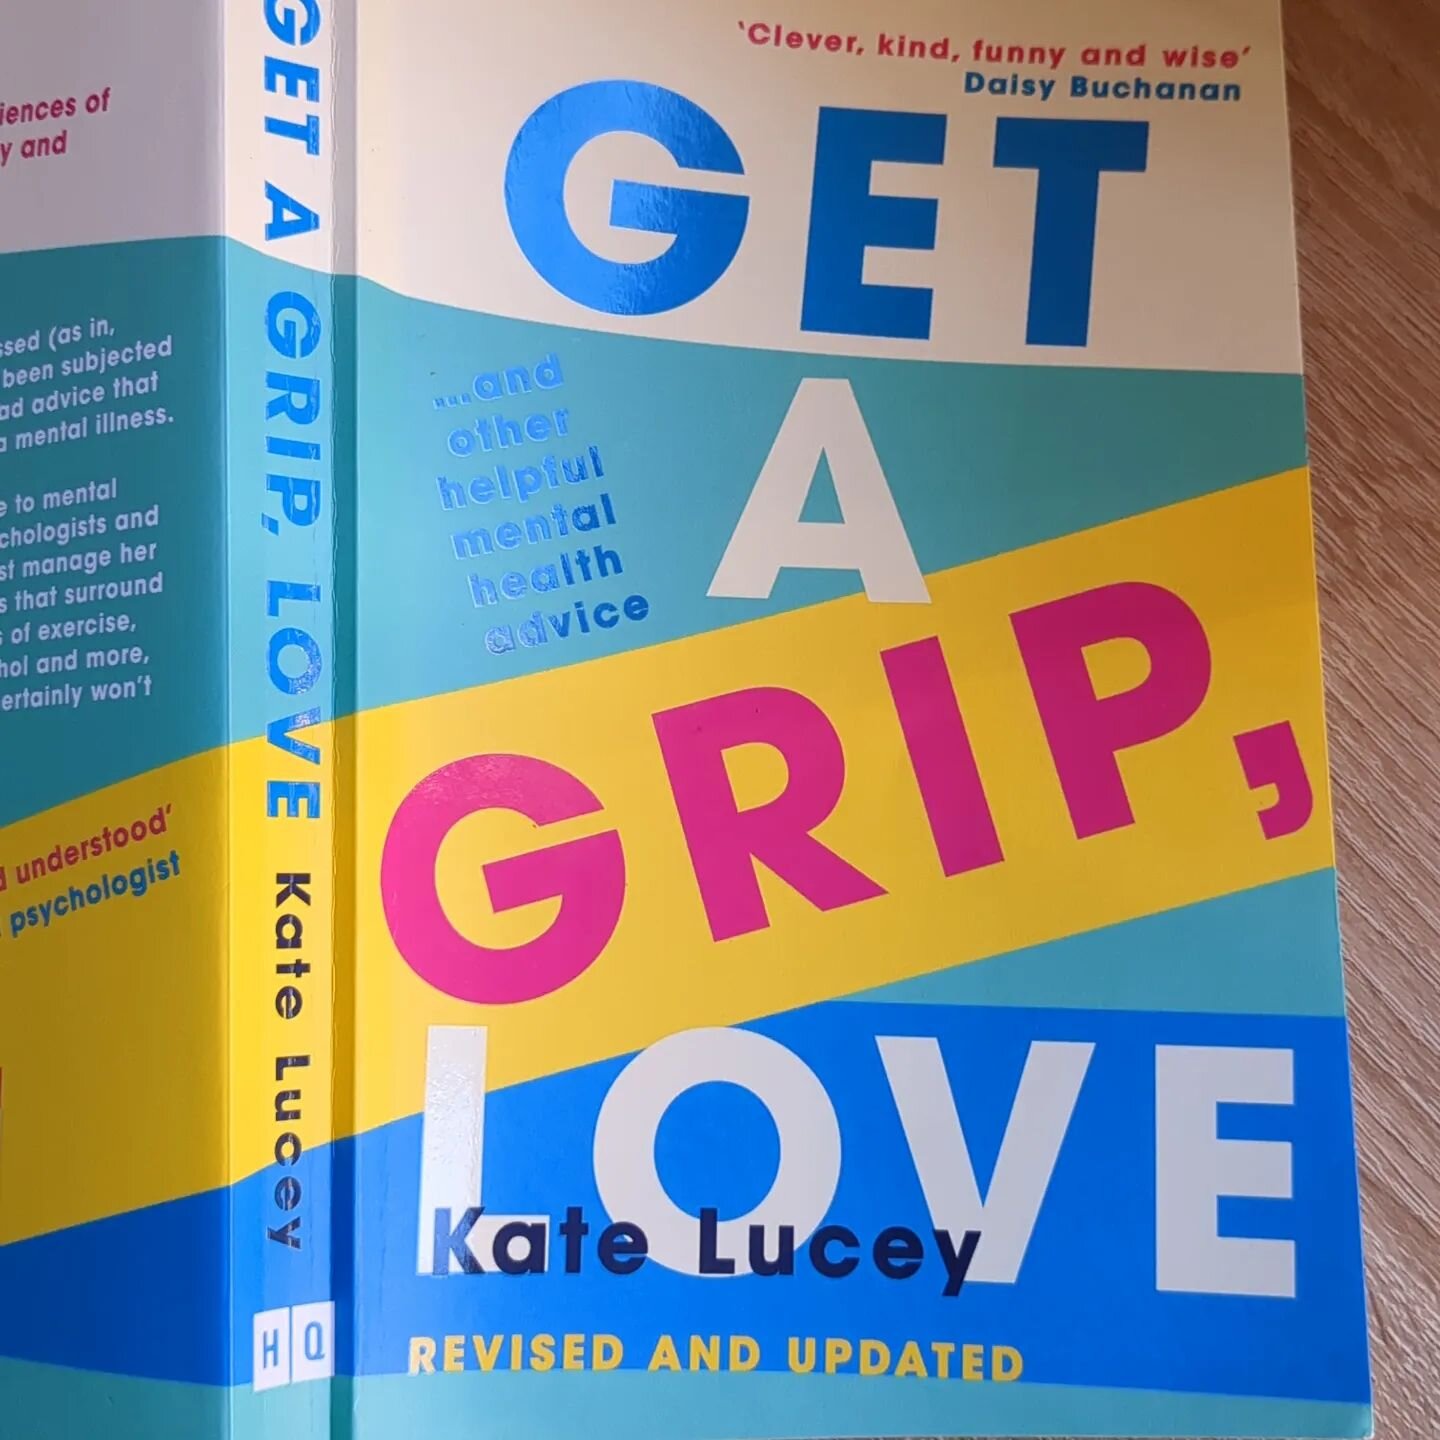 Really liked this frank and personal book about depression, which will tell you many things but definitely not to just &quot;get a grip, love.&quot; I really admire Kate Lucey's honesty and she manages to convey that she really gets depression (and t